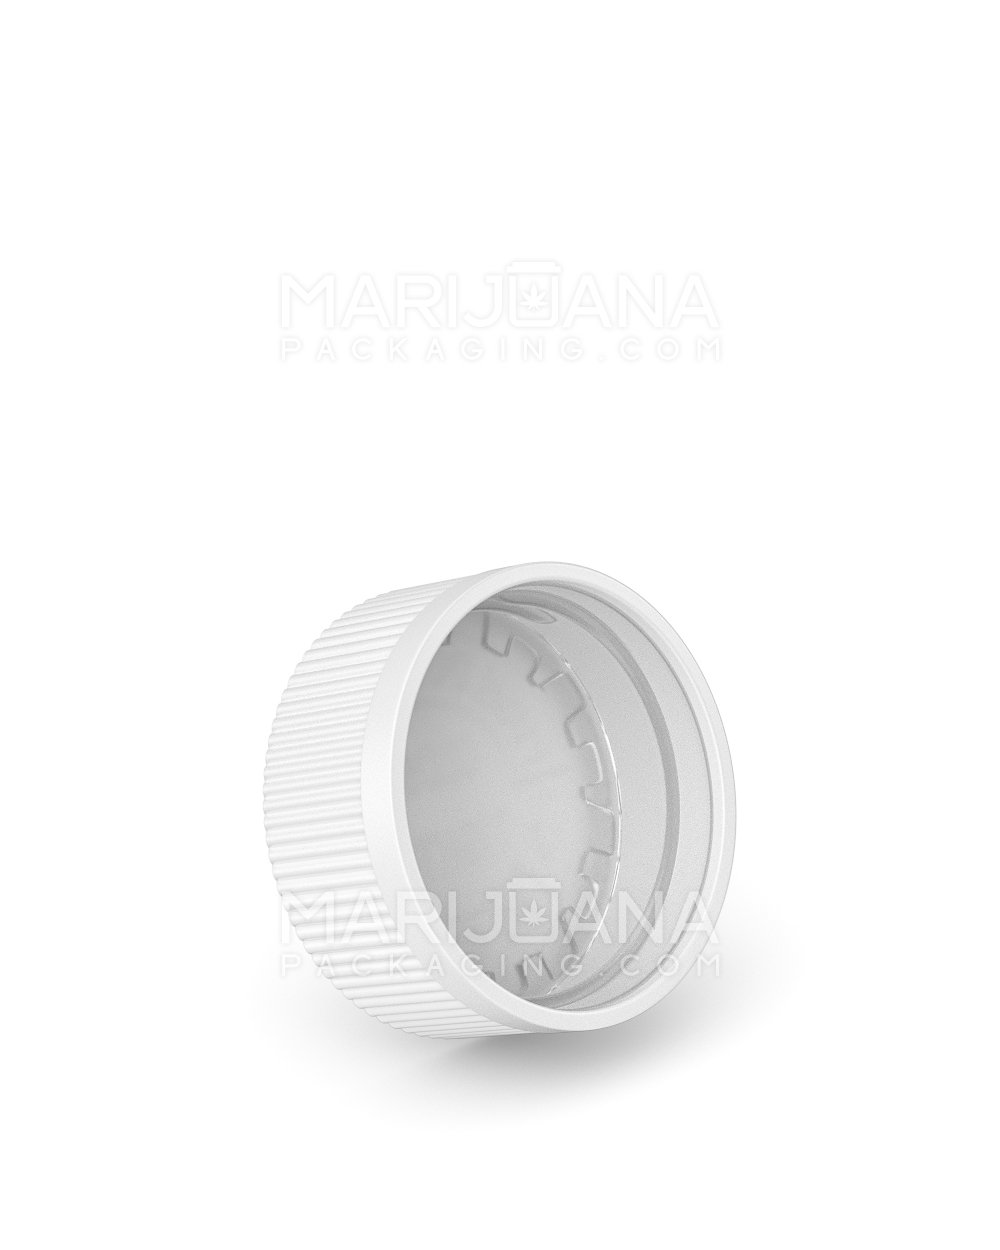 Child Resistant | Ribbed Push Down & Turn Plastic Caps | 33mm - Semi Gloss White - 252 Count - 2